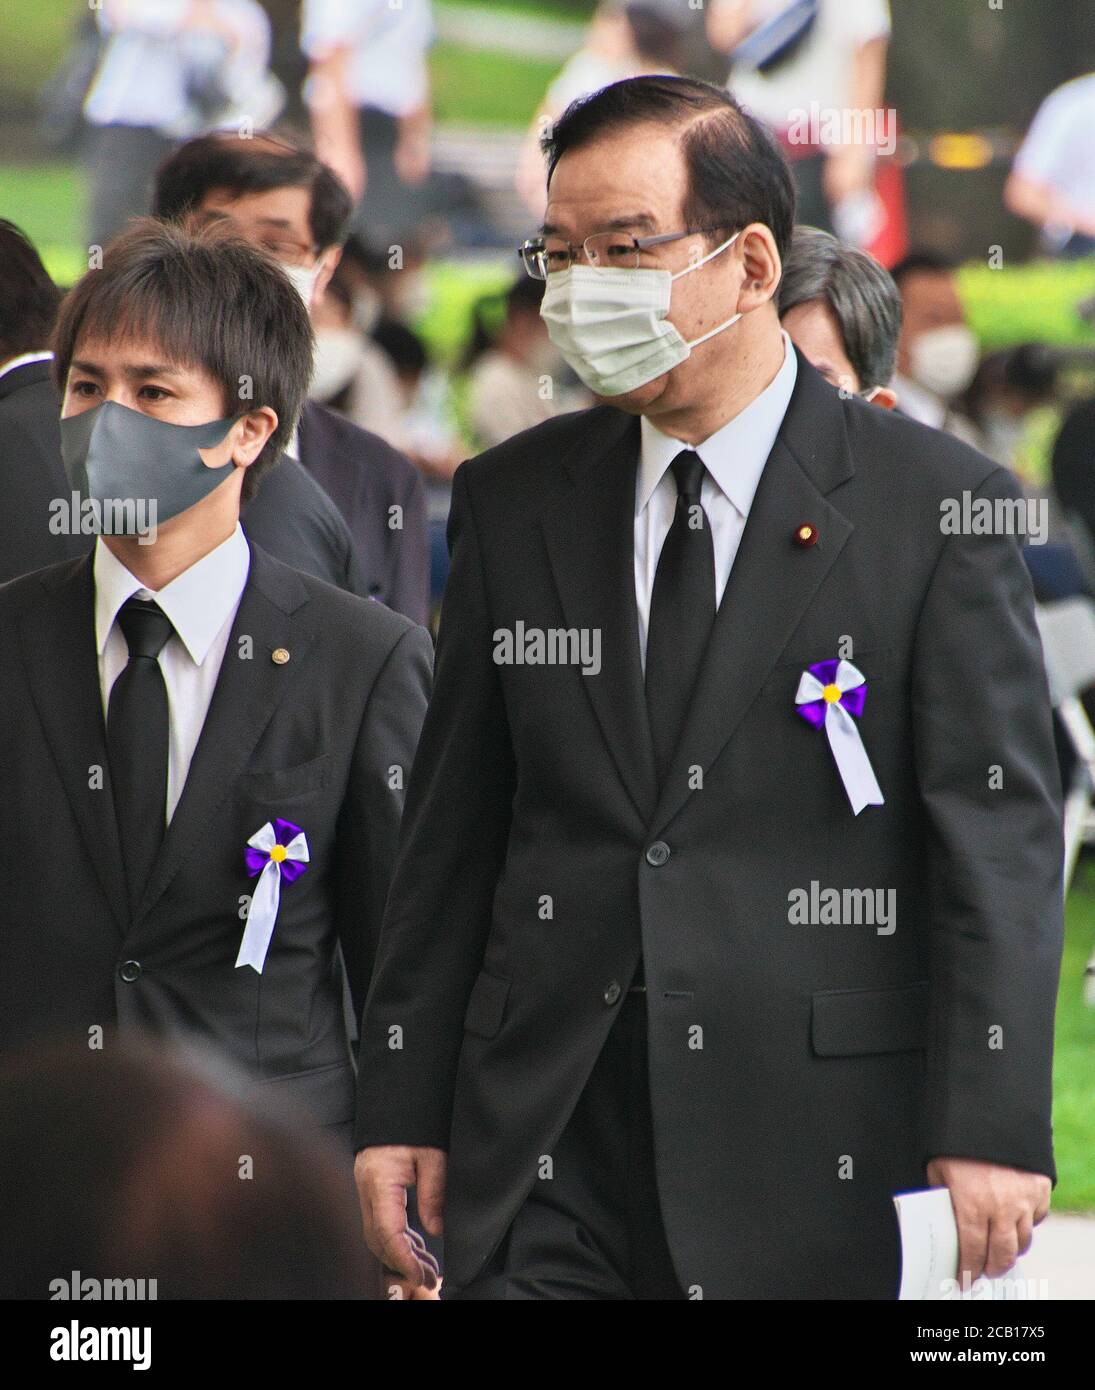 chairman of the japanese communist party kazuo shii attends the ceremony of the 75th anniversary memorial service for atomic bomb victims at hiroshima peace memorial park in hiroshima japan on august 6 2020 credit afloalamy live news 2CB17X5